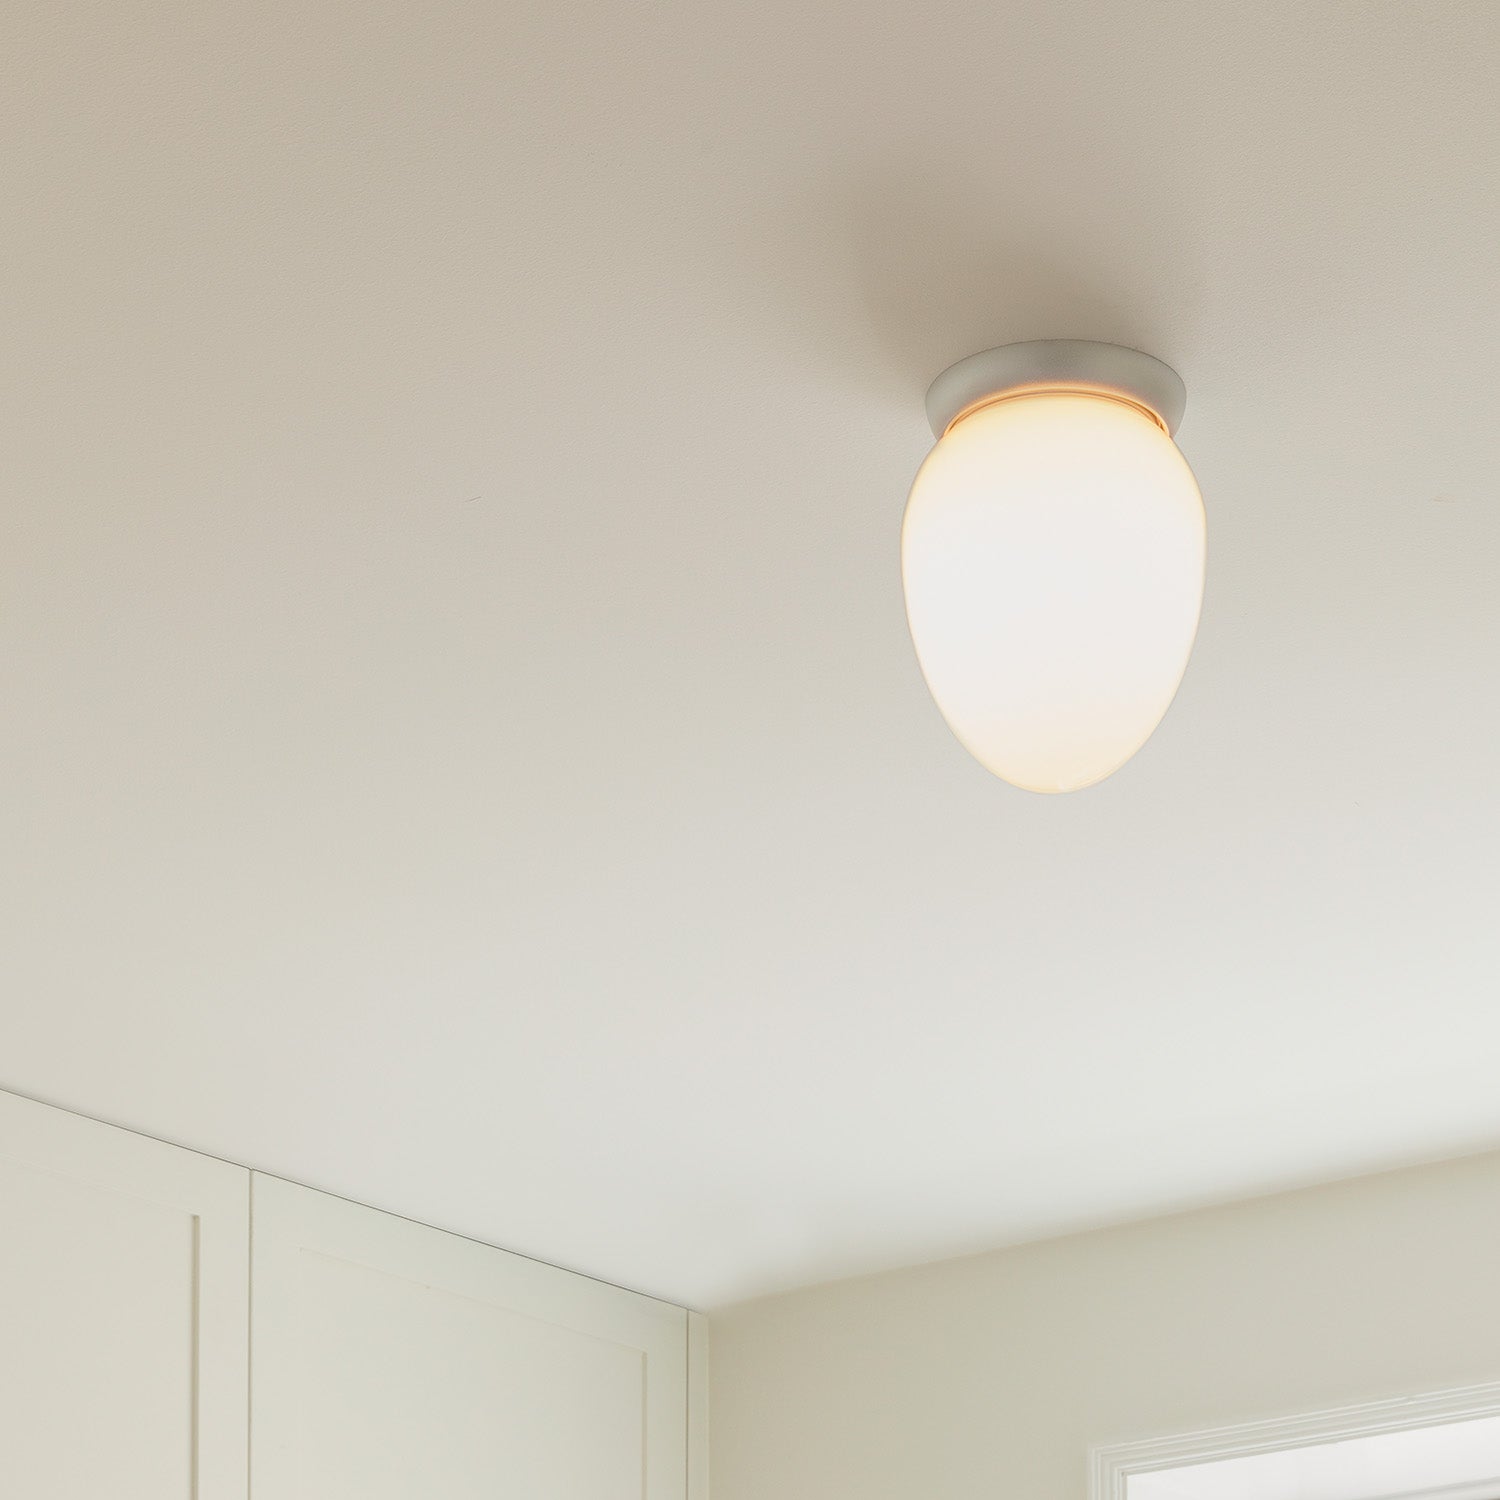 RIZZATTO 171 - Egg white glass ceiling light, design and cocooning